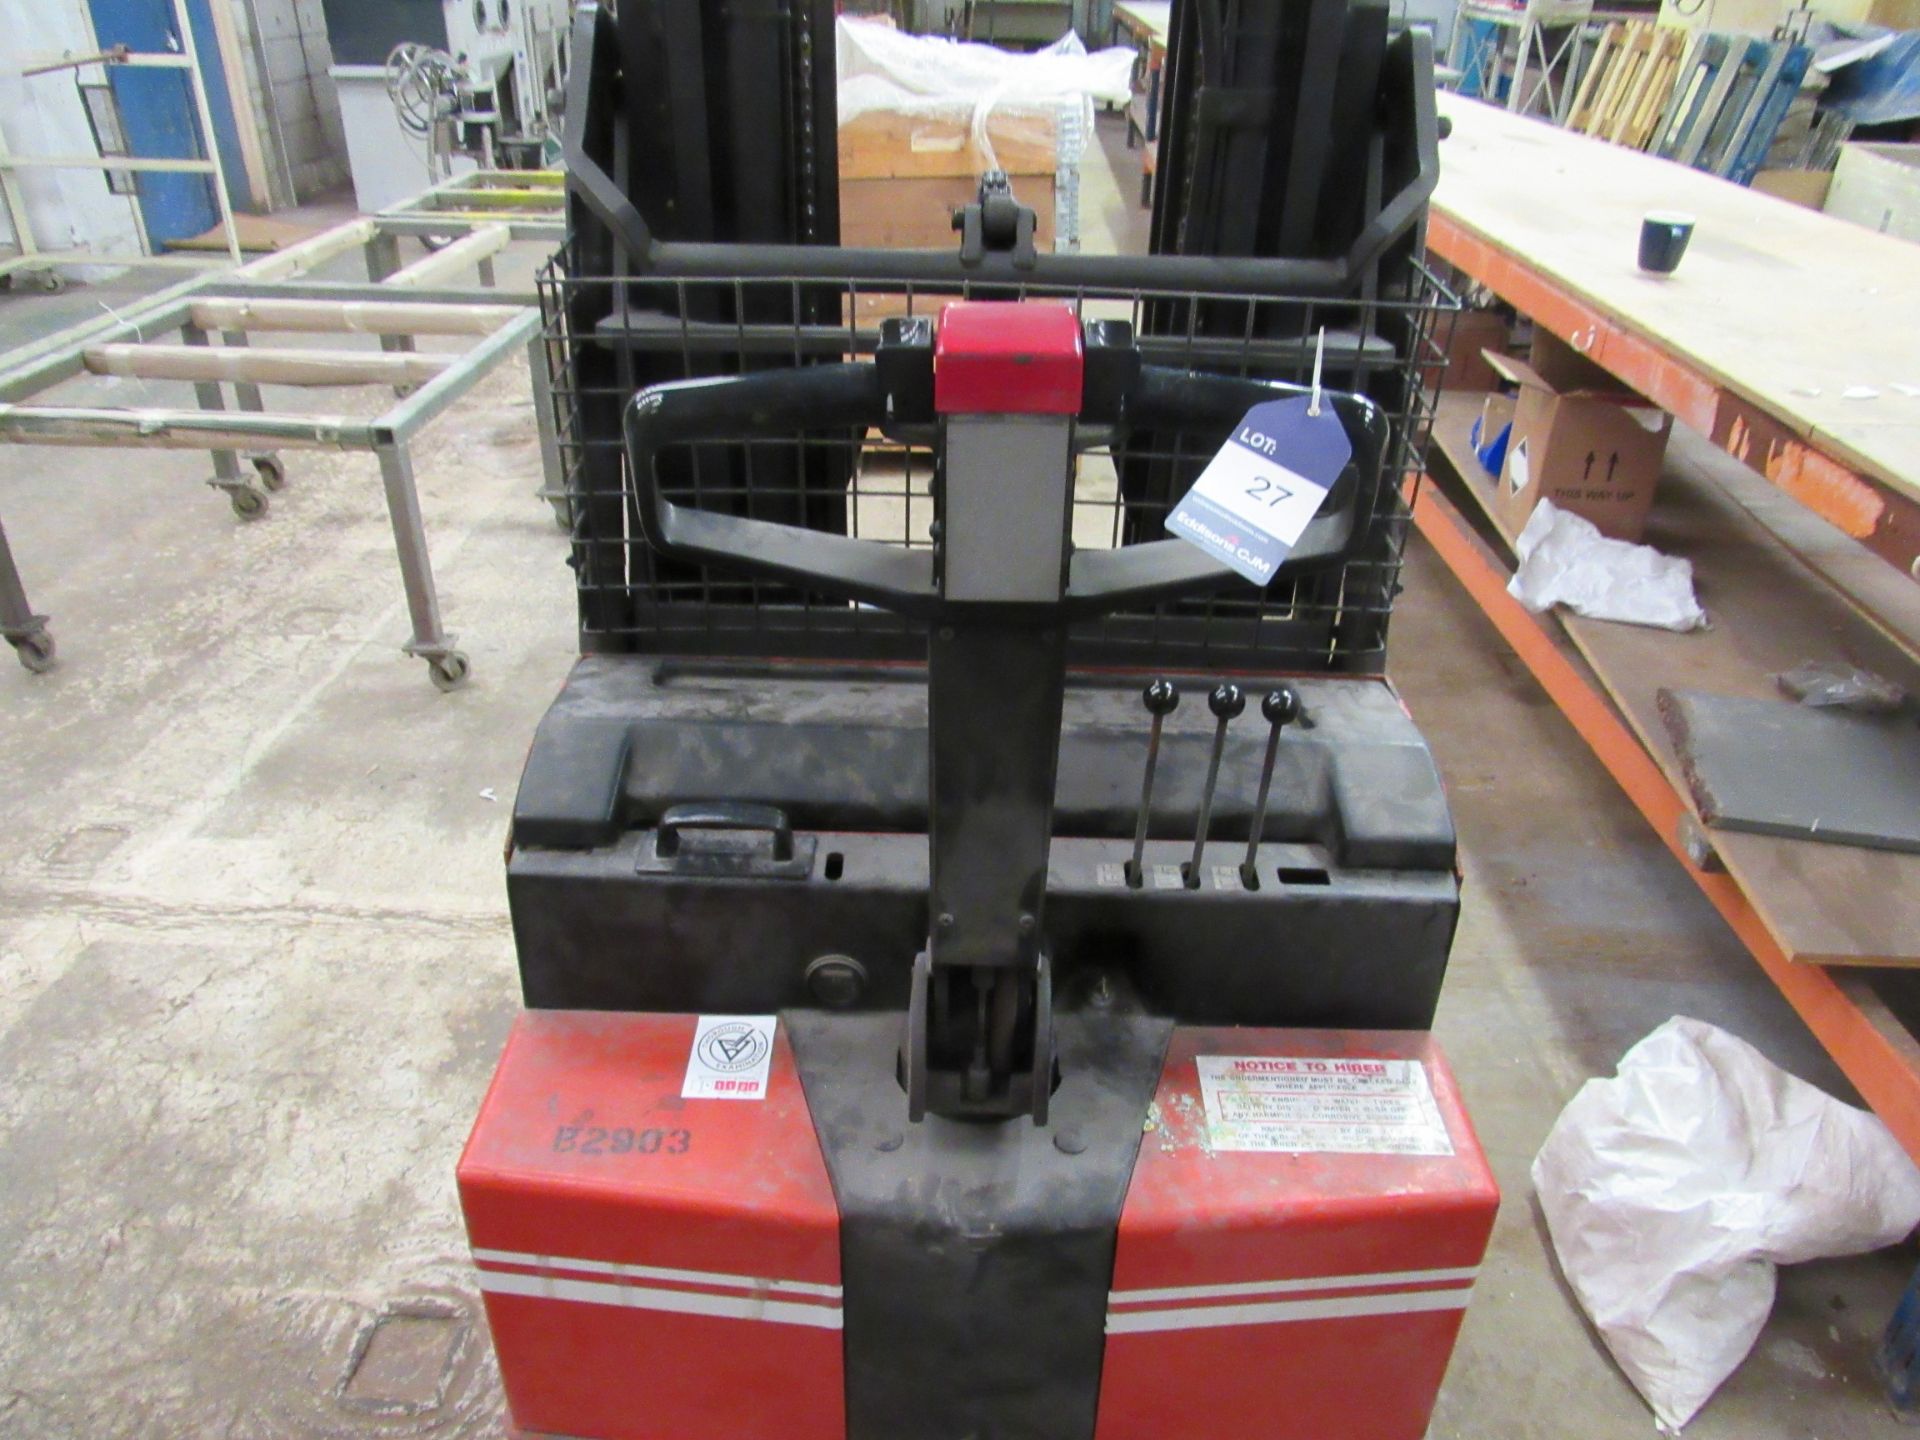 BT LSR 1200/2 1200Kg Electric 3 Axis Stacker Truck with Charger - Located on the first floor. The - Image 4 of 5